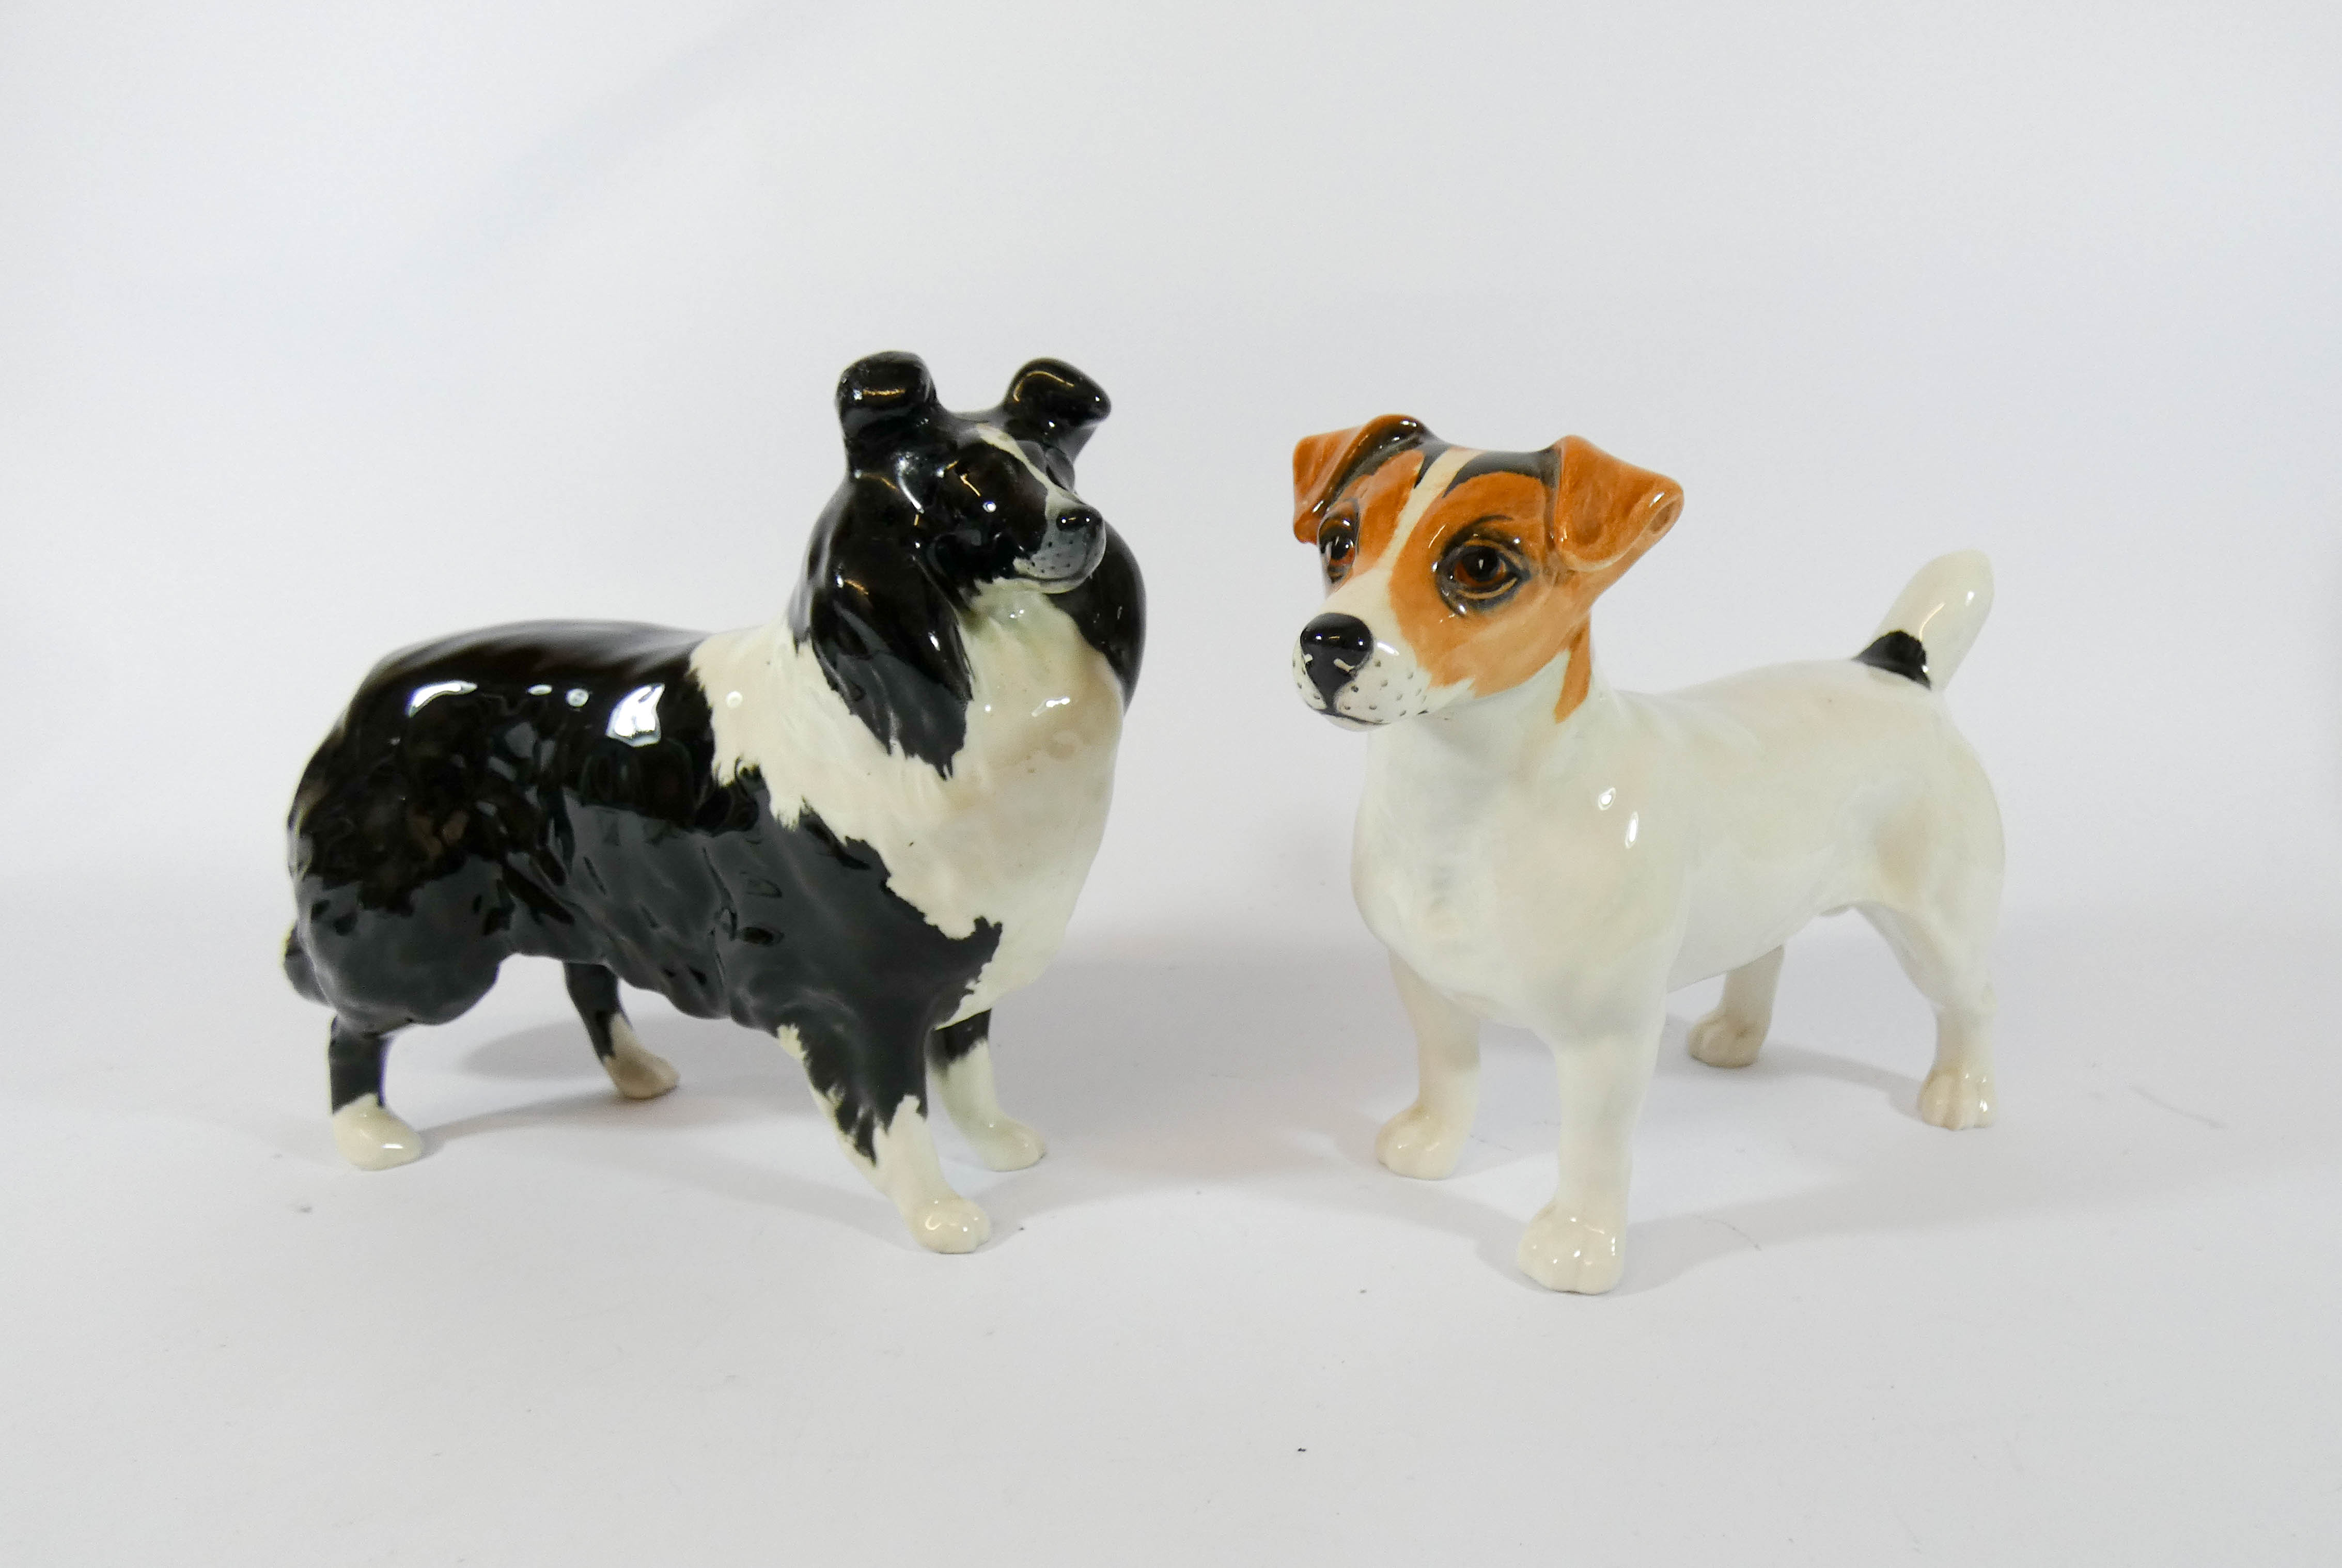 A Beswick model of a Collie dog and a Jack Russell terrier